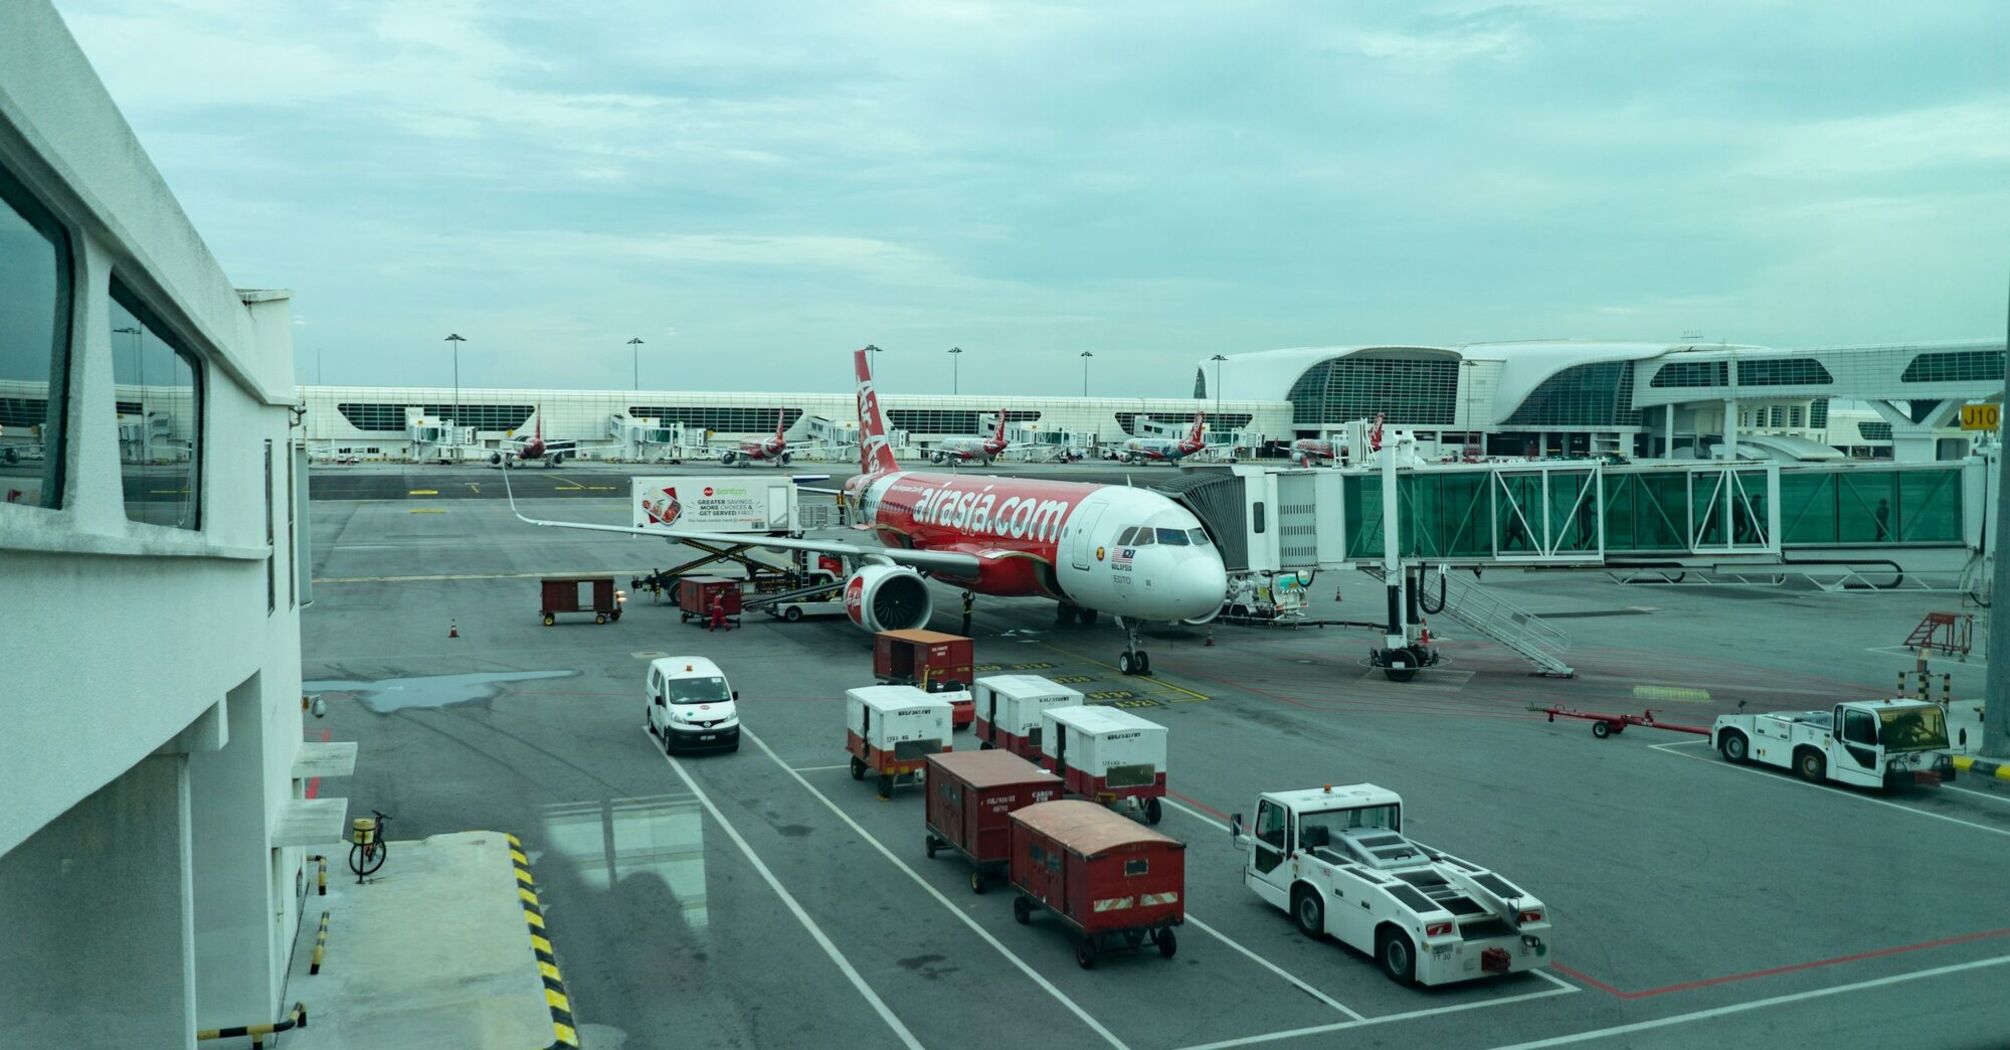 AirAsia aircraft parked at the airport gate, with ground support vehicles nearby